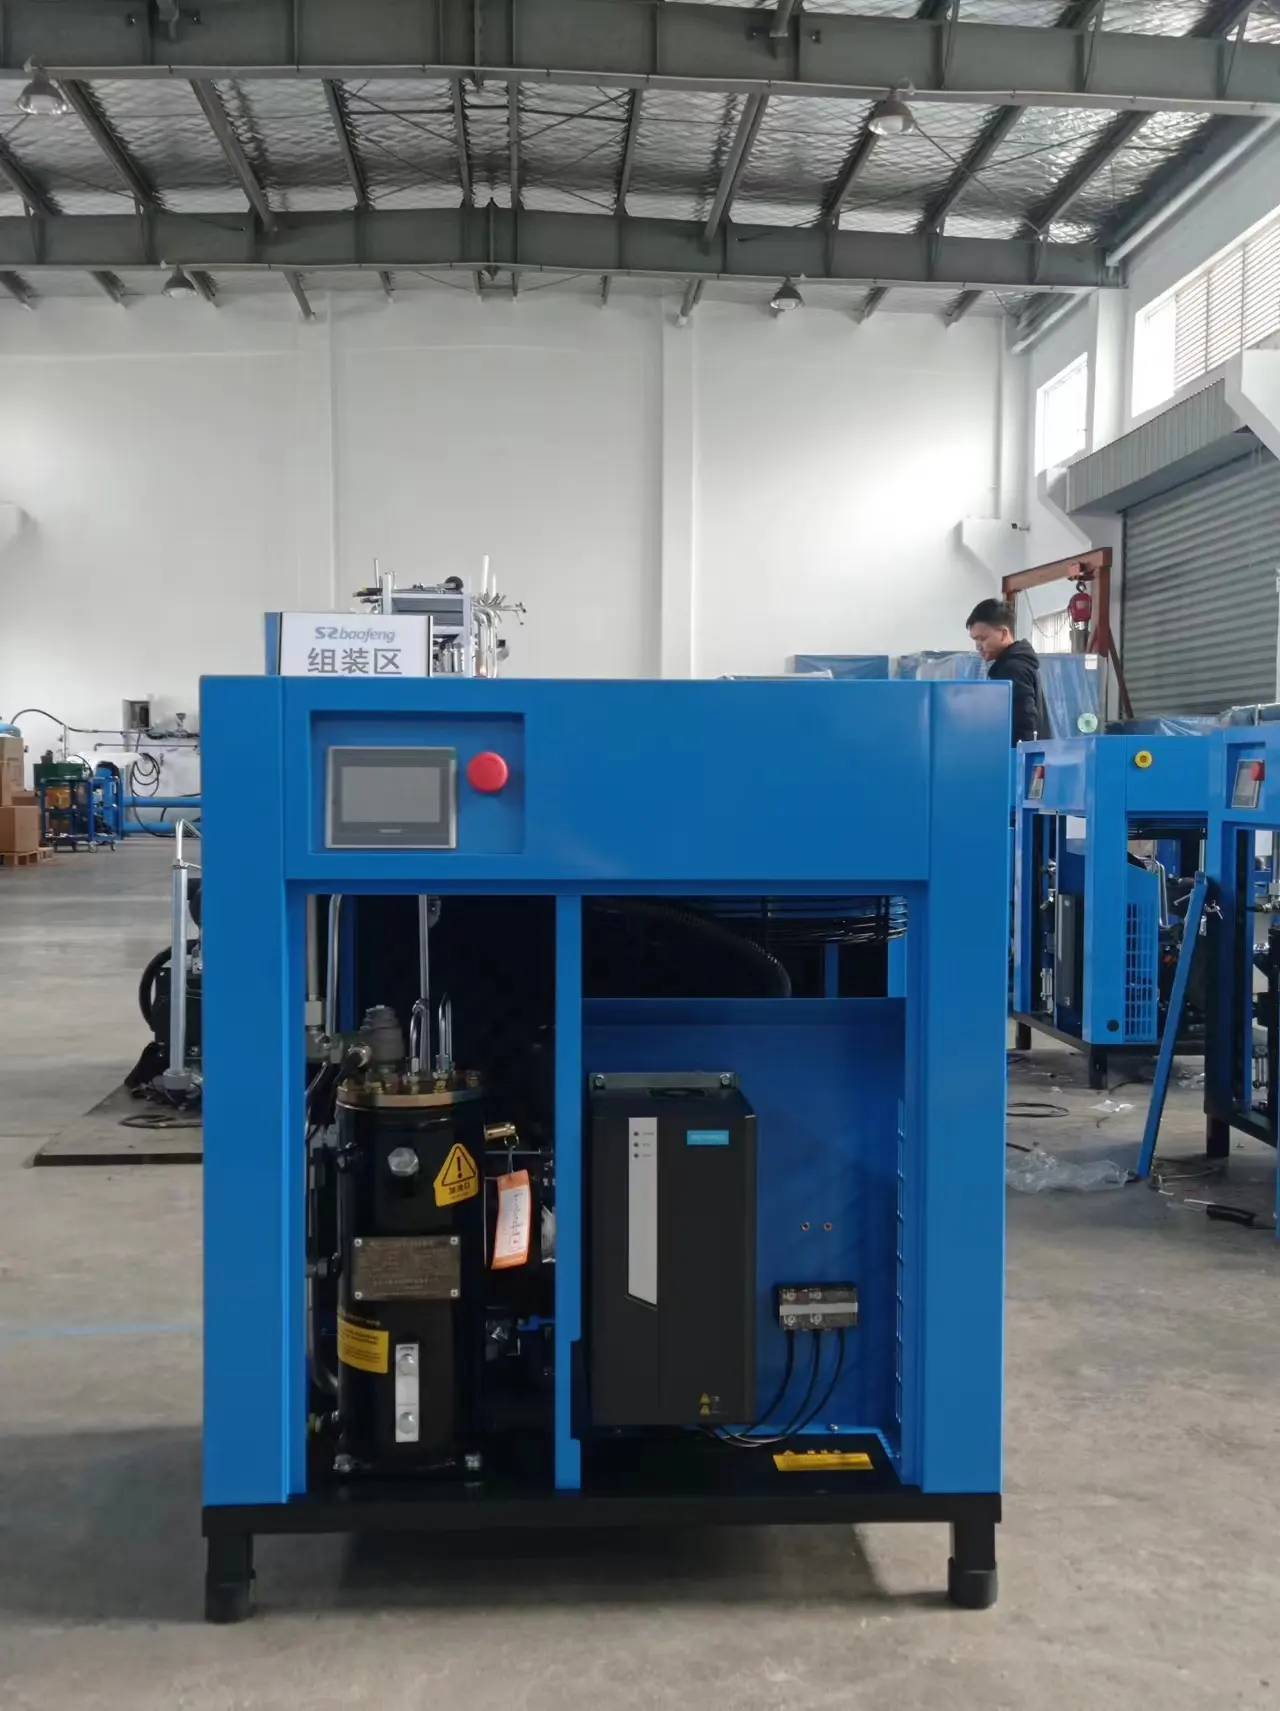 oil cooling High-Pressure General Purpose Refrigerated Dryer Unit Electric with Converter 7.5kw screw air compressor